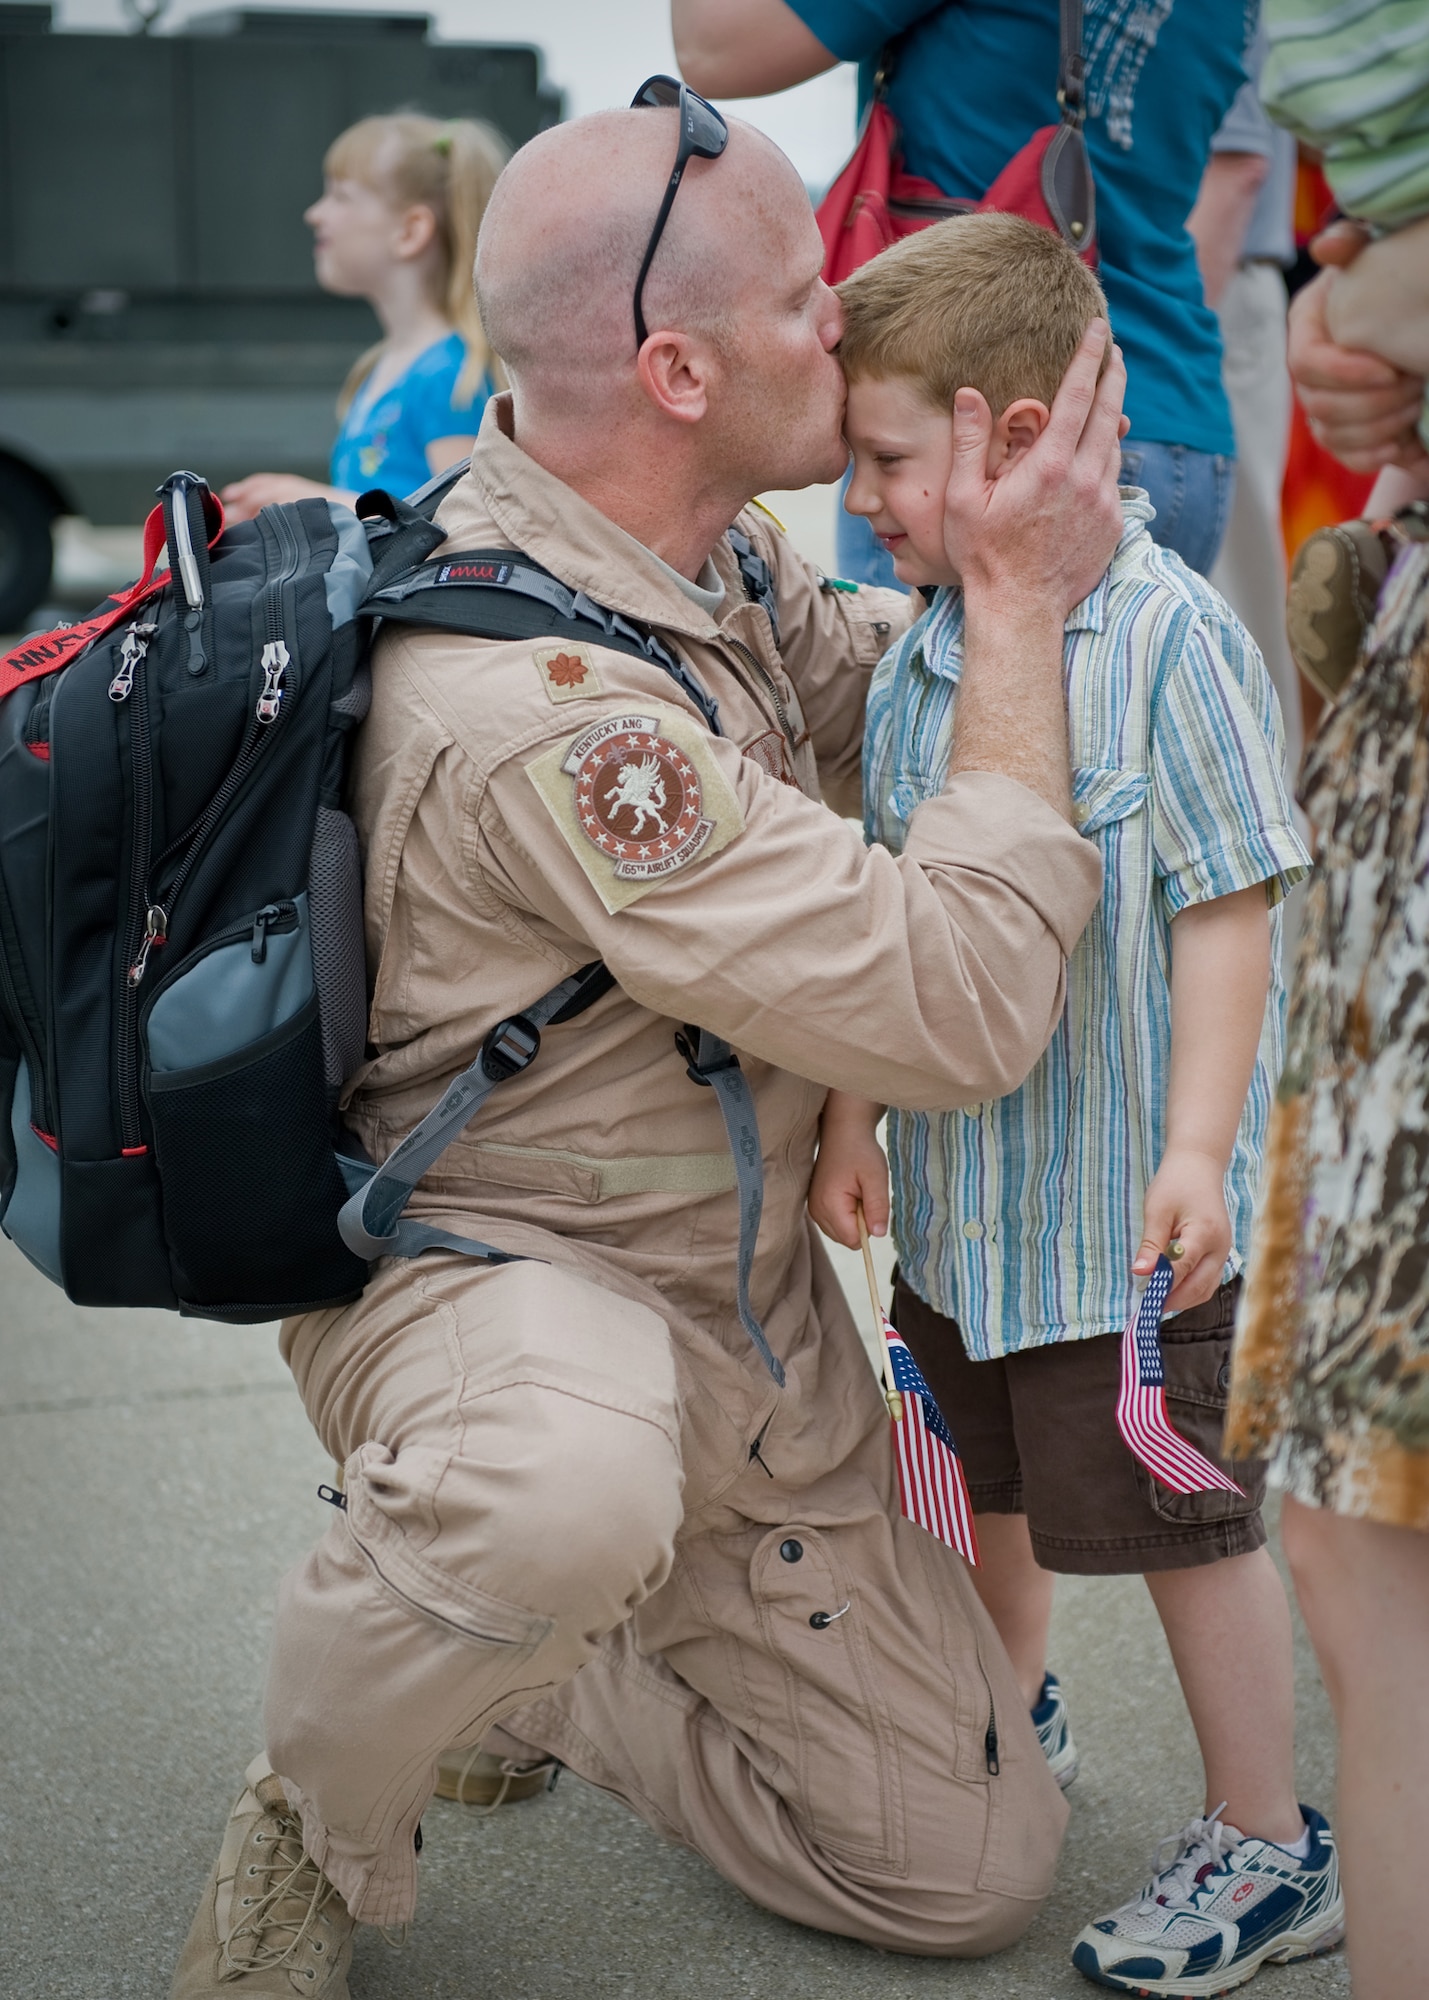 Maj. Dave Flynn, an aircraft commander in the 123rd Airlift Wing, greets his son on the flightline of the Kentucky Air National Guard Base in Louisville, Ky., on May 16, 2009. Major Flynn was returning from a two-month deployment to Afghanistan for Operation Enduring Freedom. (USAF photo by Capt. Dale Greer.)